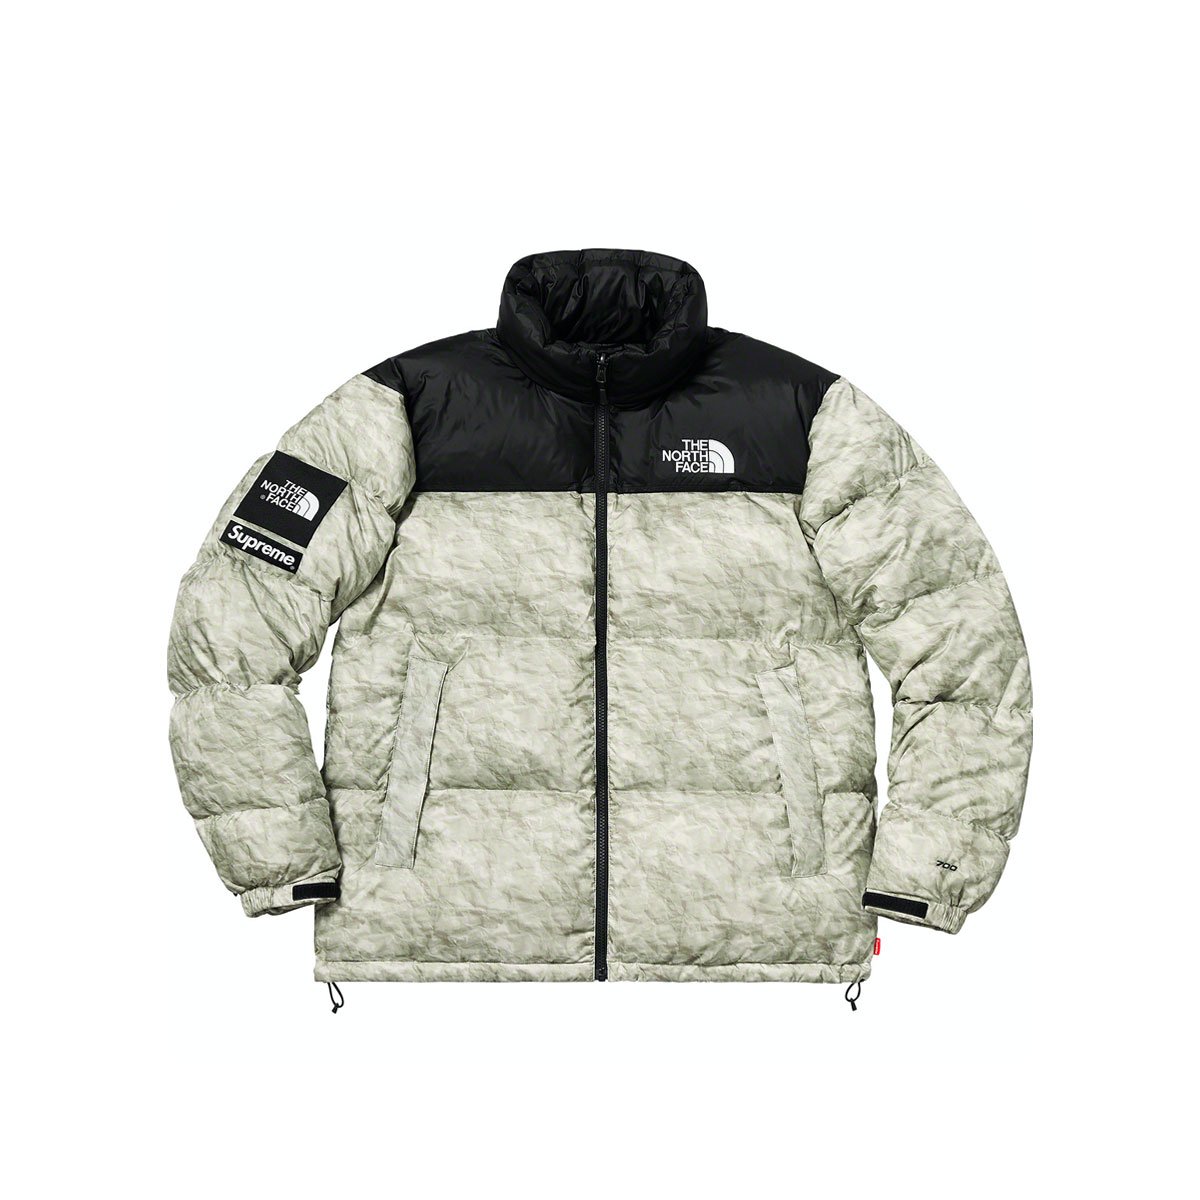 Supreme The North Face 19fw M hooded